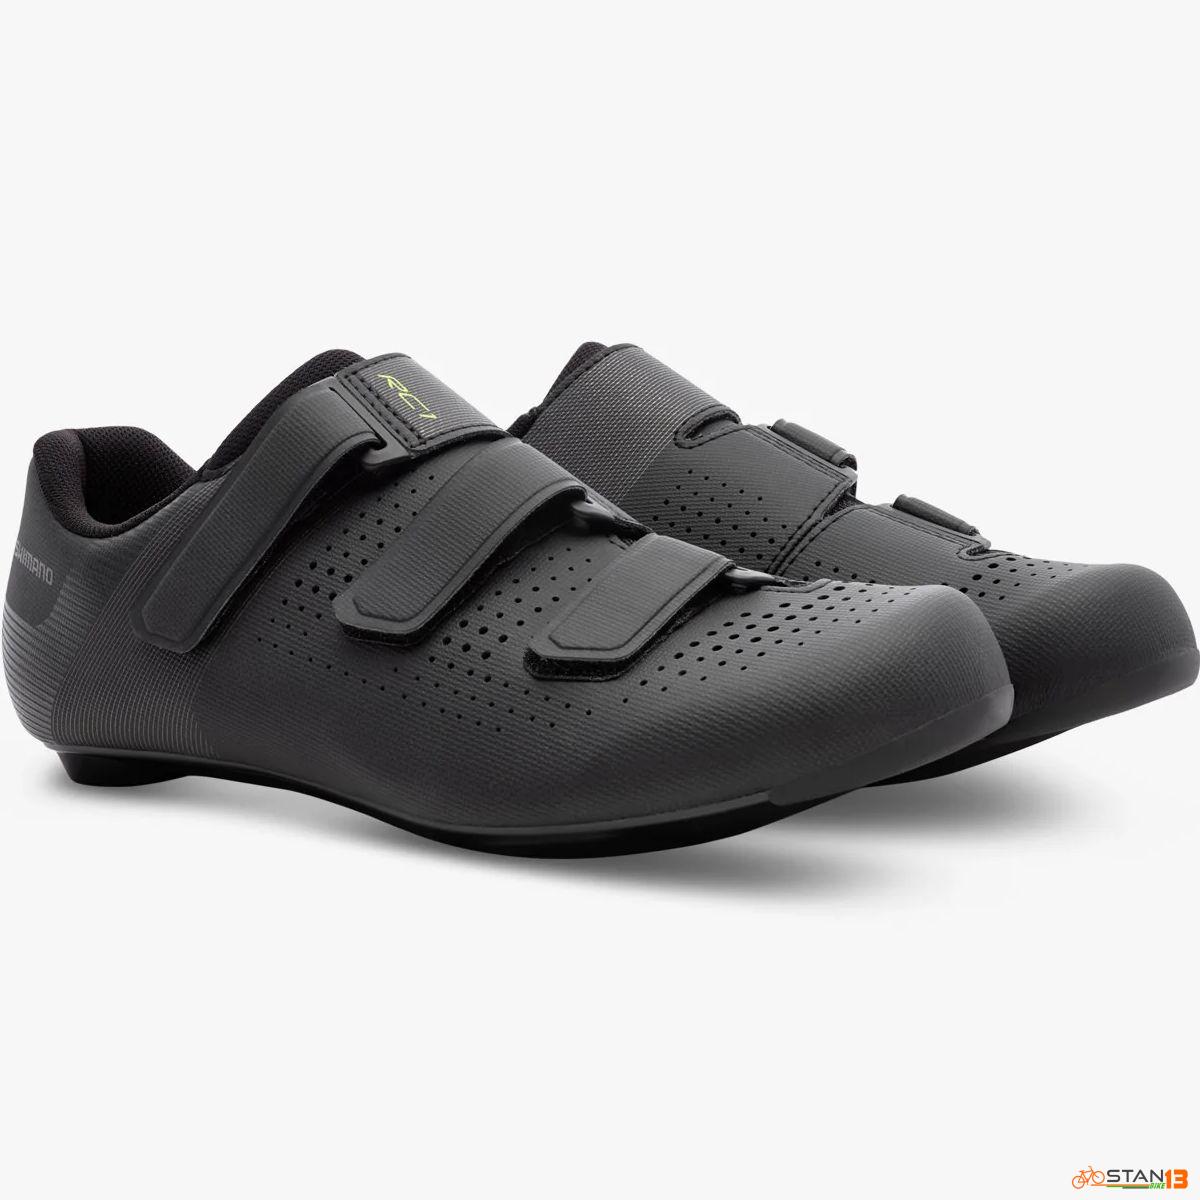 Shoes Shimano RC100 Road Bike Shoes Size 42 43 or 44 or 8.5 US 9 US or 10 US